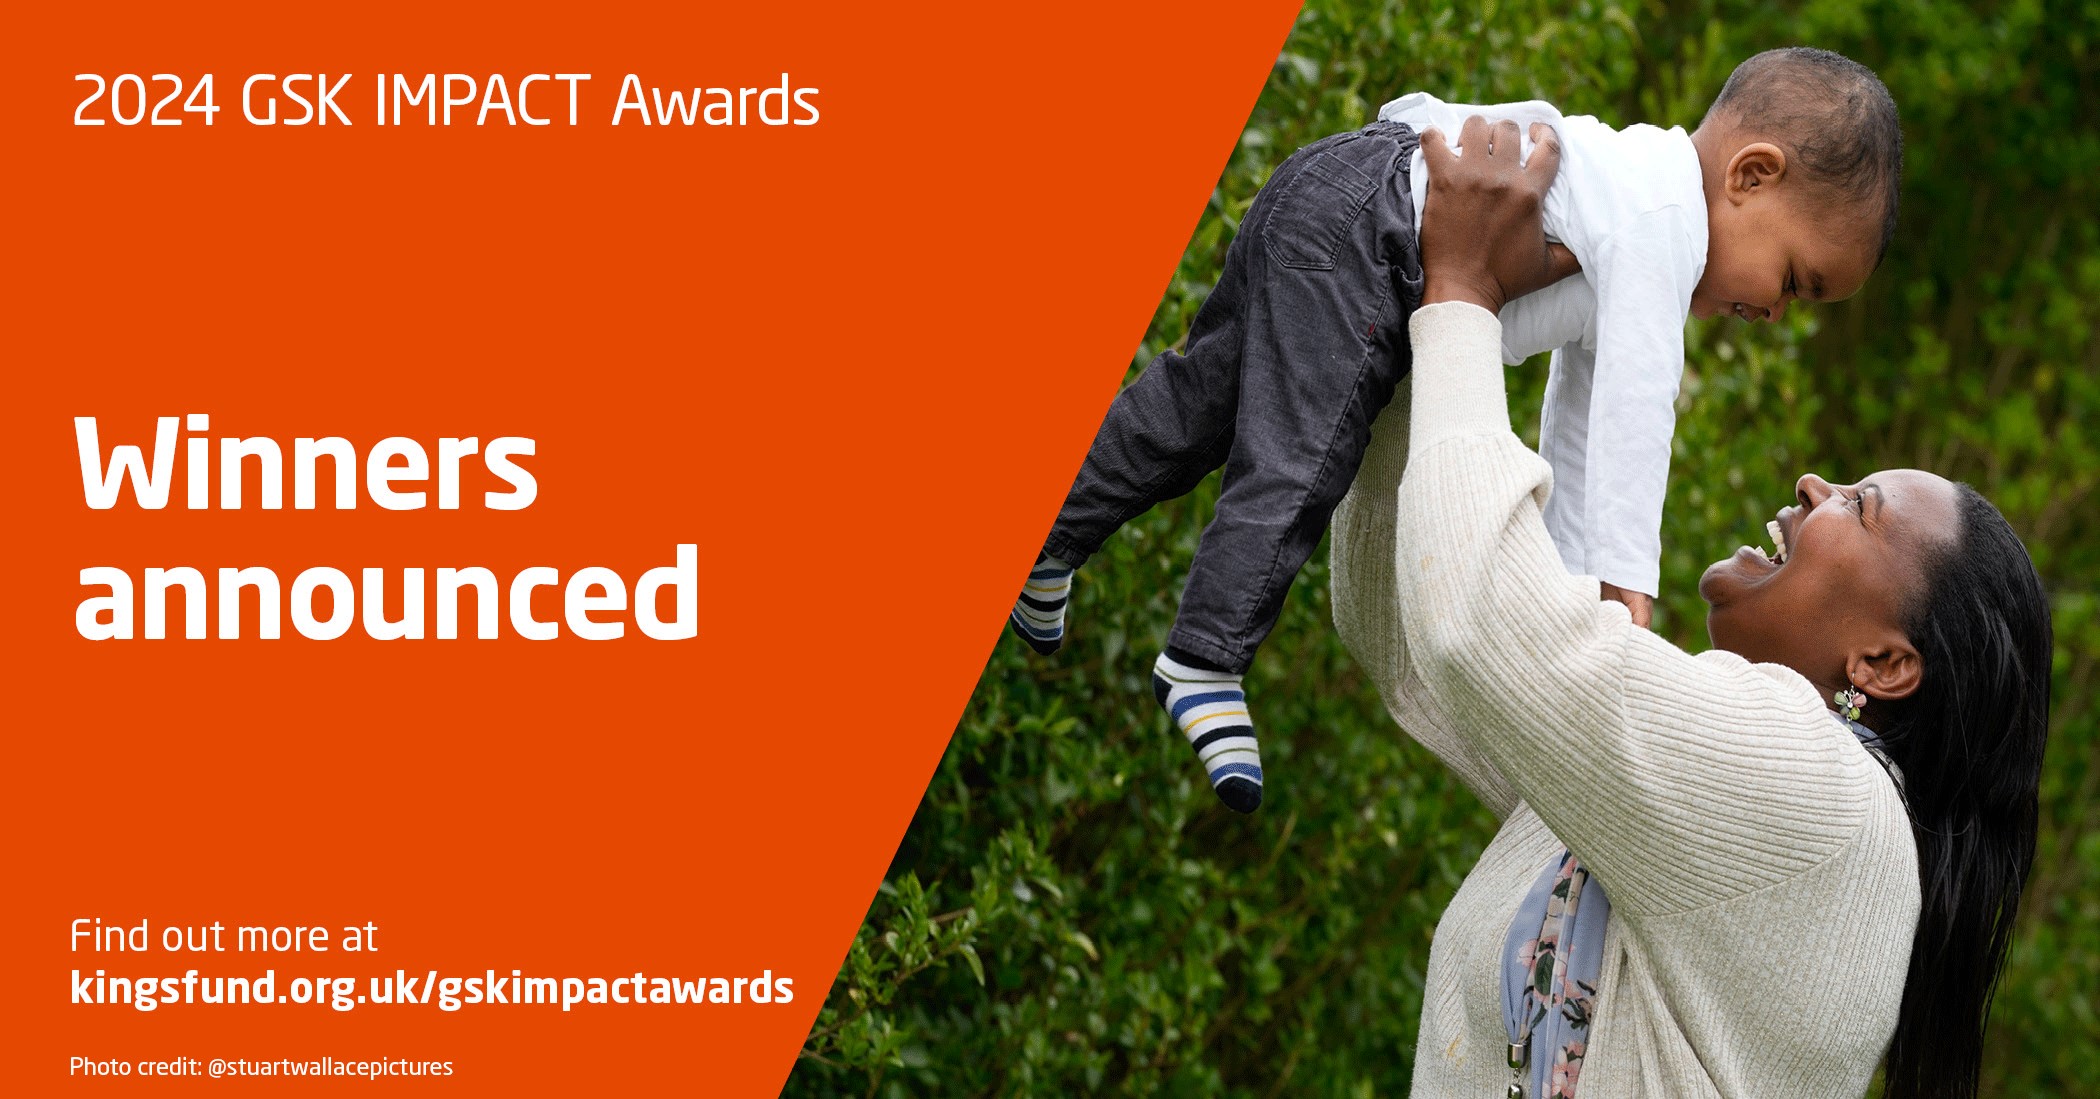 GSK IMPACT Awards The King's Fund